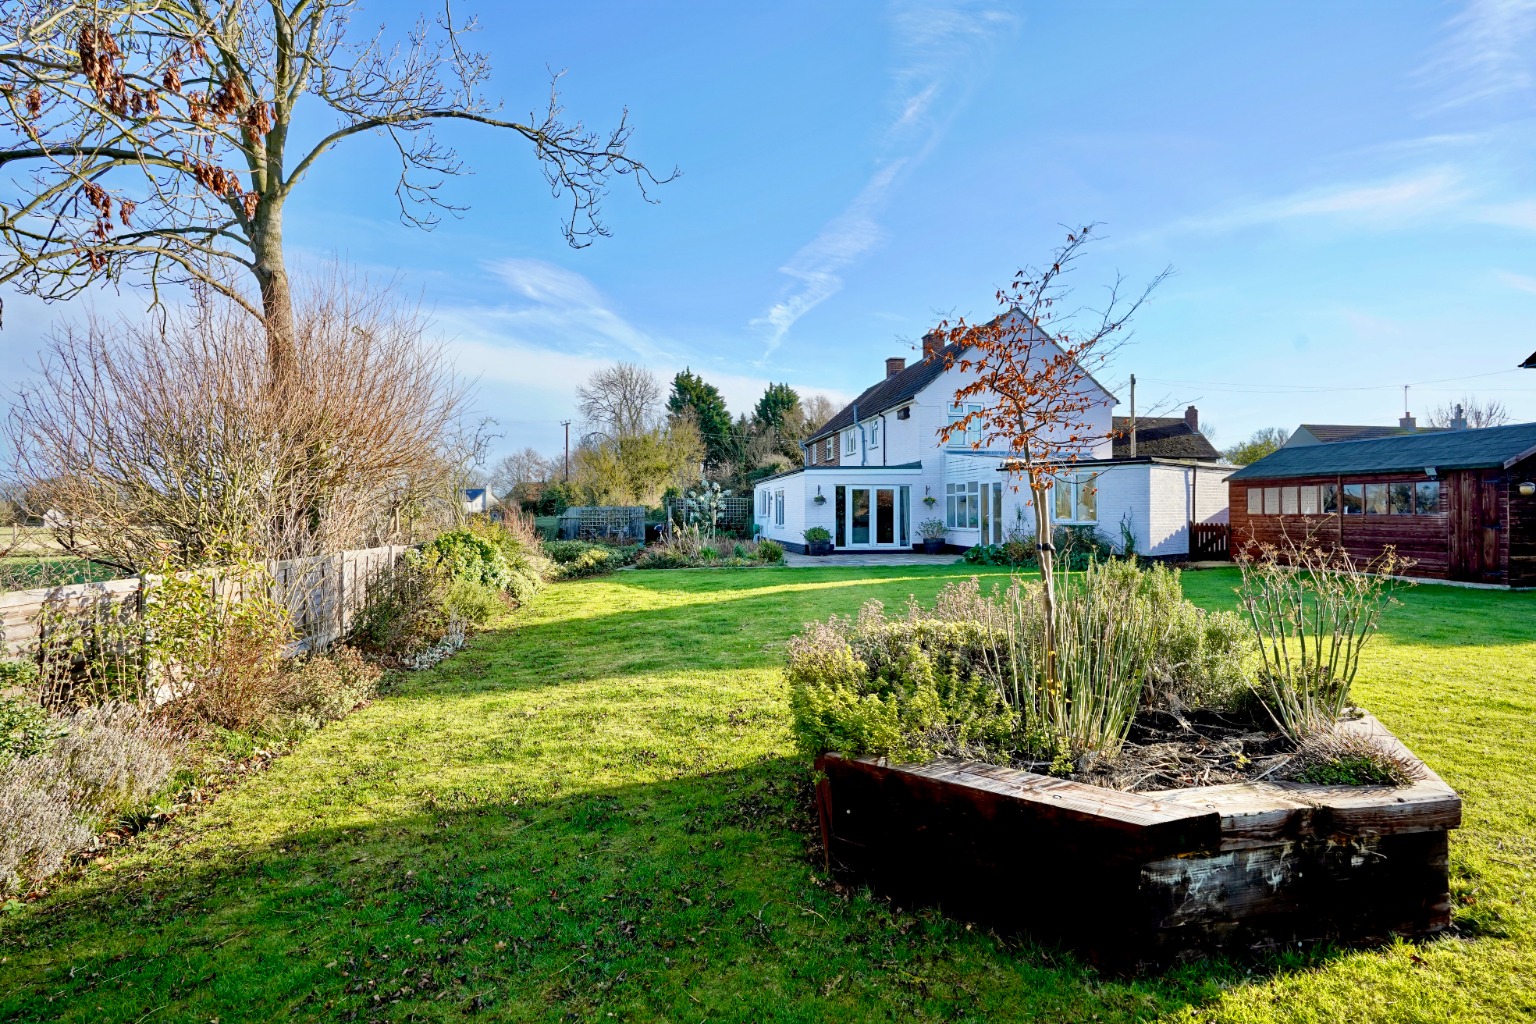 A real hidden gem, boasting four double bedrooms, separate reception rooms and rolling countryside views.